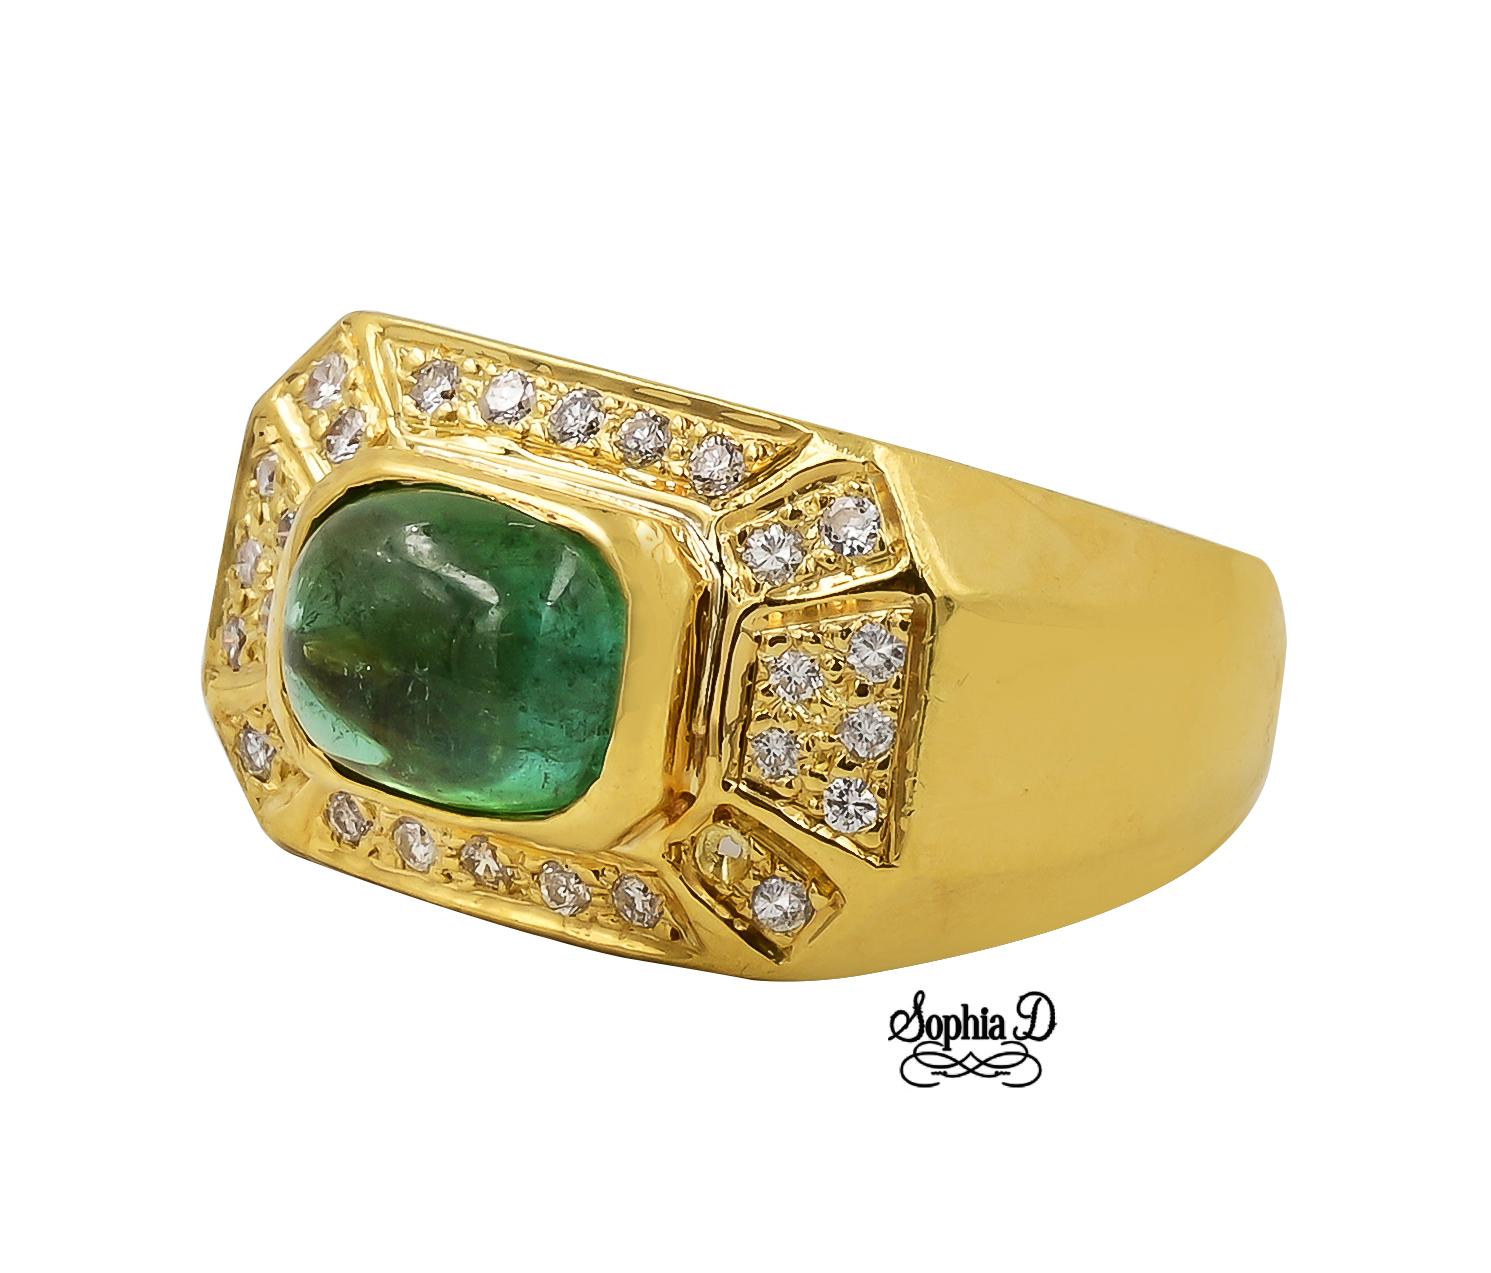 18K yellow gold ring with emerald and diamonds.

Sophia D by Joseph Dardashti LTD has been known worldwide for 35 years and are inspired by classic Art Deco design that merges with modern manufacturing techniques. 